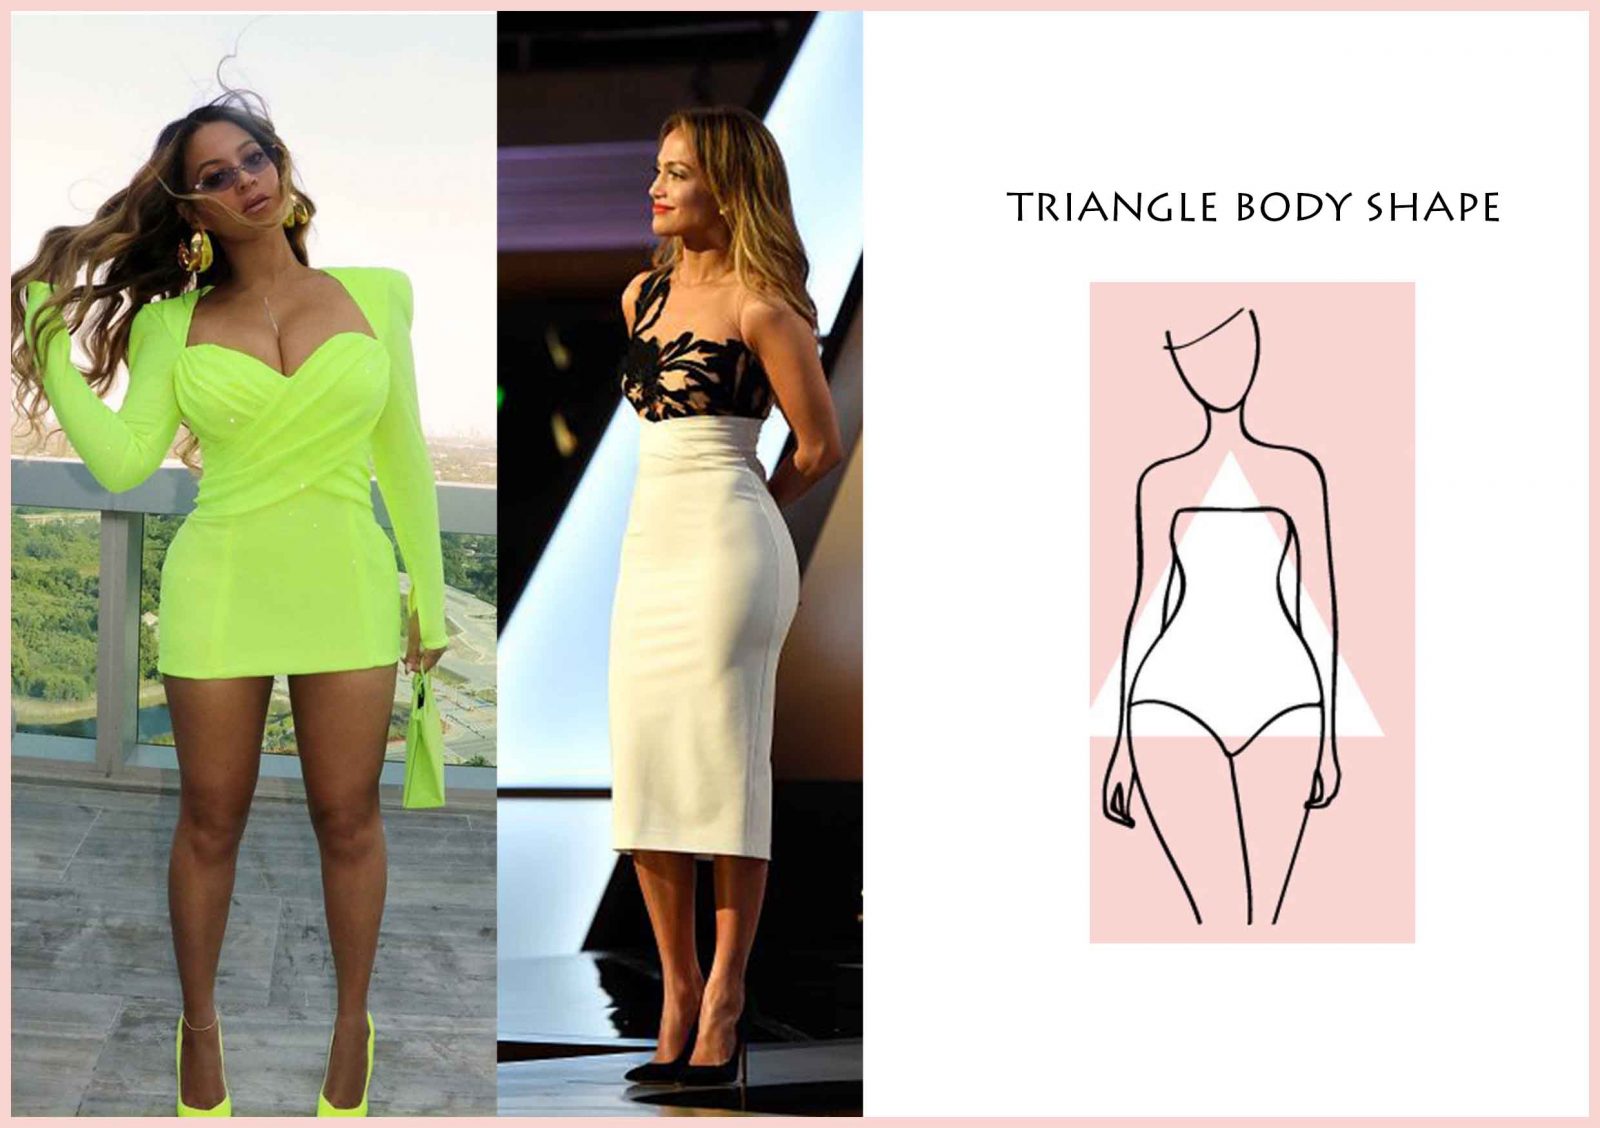 Discover How to Dress an Inverted Triangle Body Type